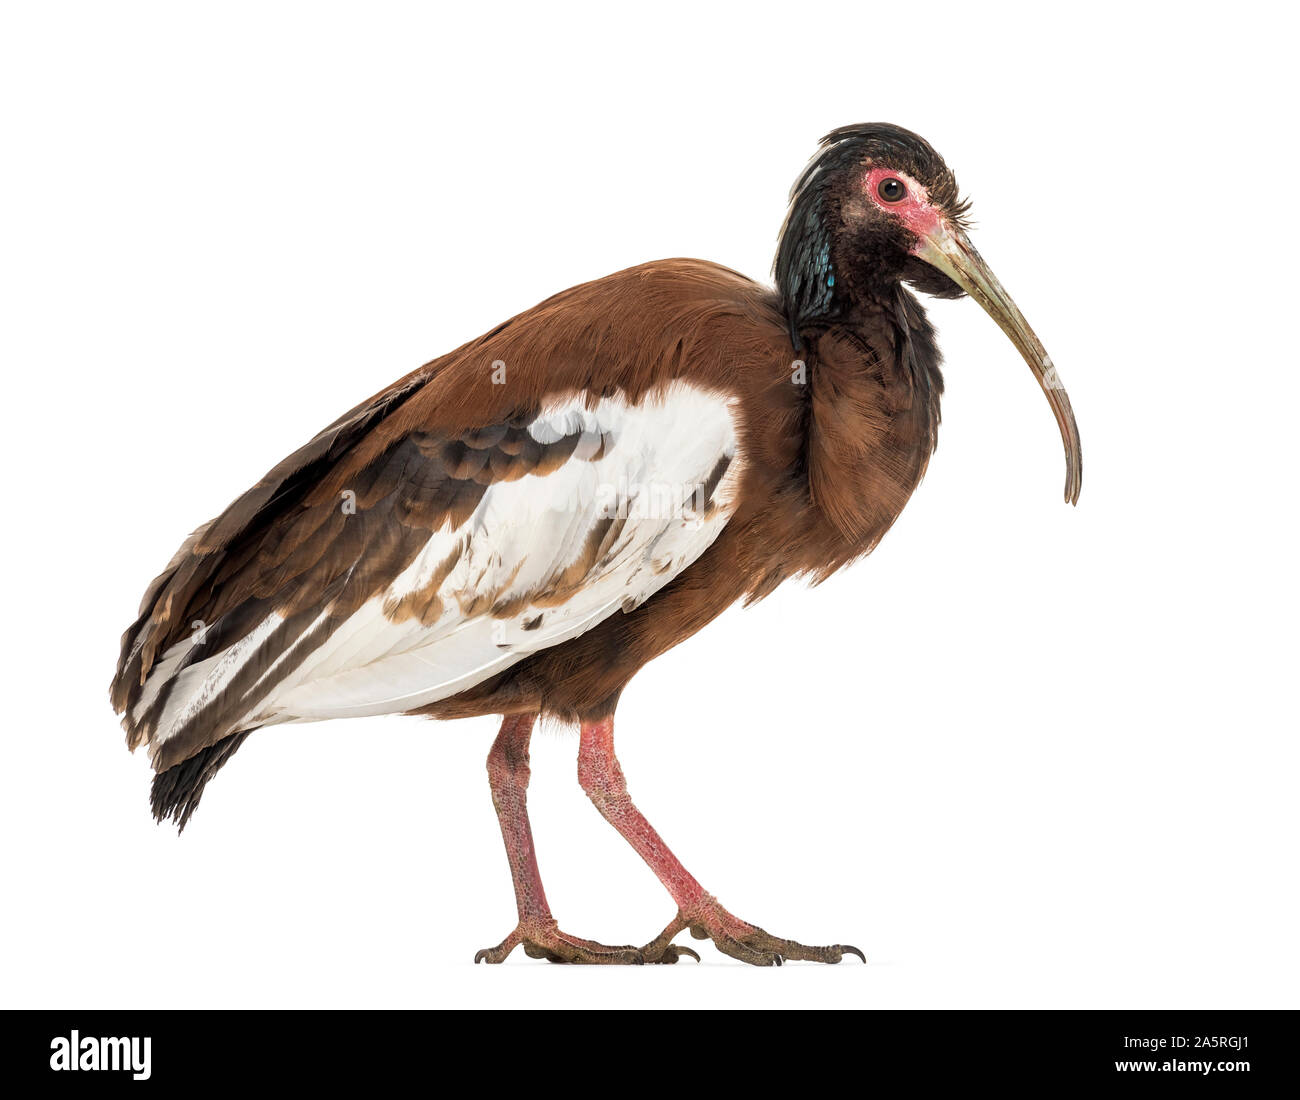 Madagascan ibis, Lophotibis cristata, also known as the Madagascar crested ibis, white-winged ibis or crested wood ibis standing against white backgro Stock Photo